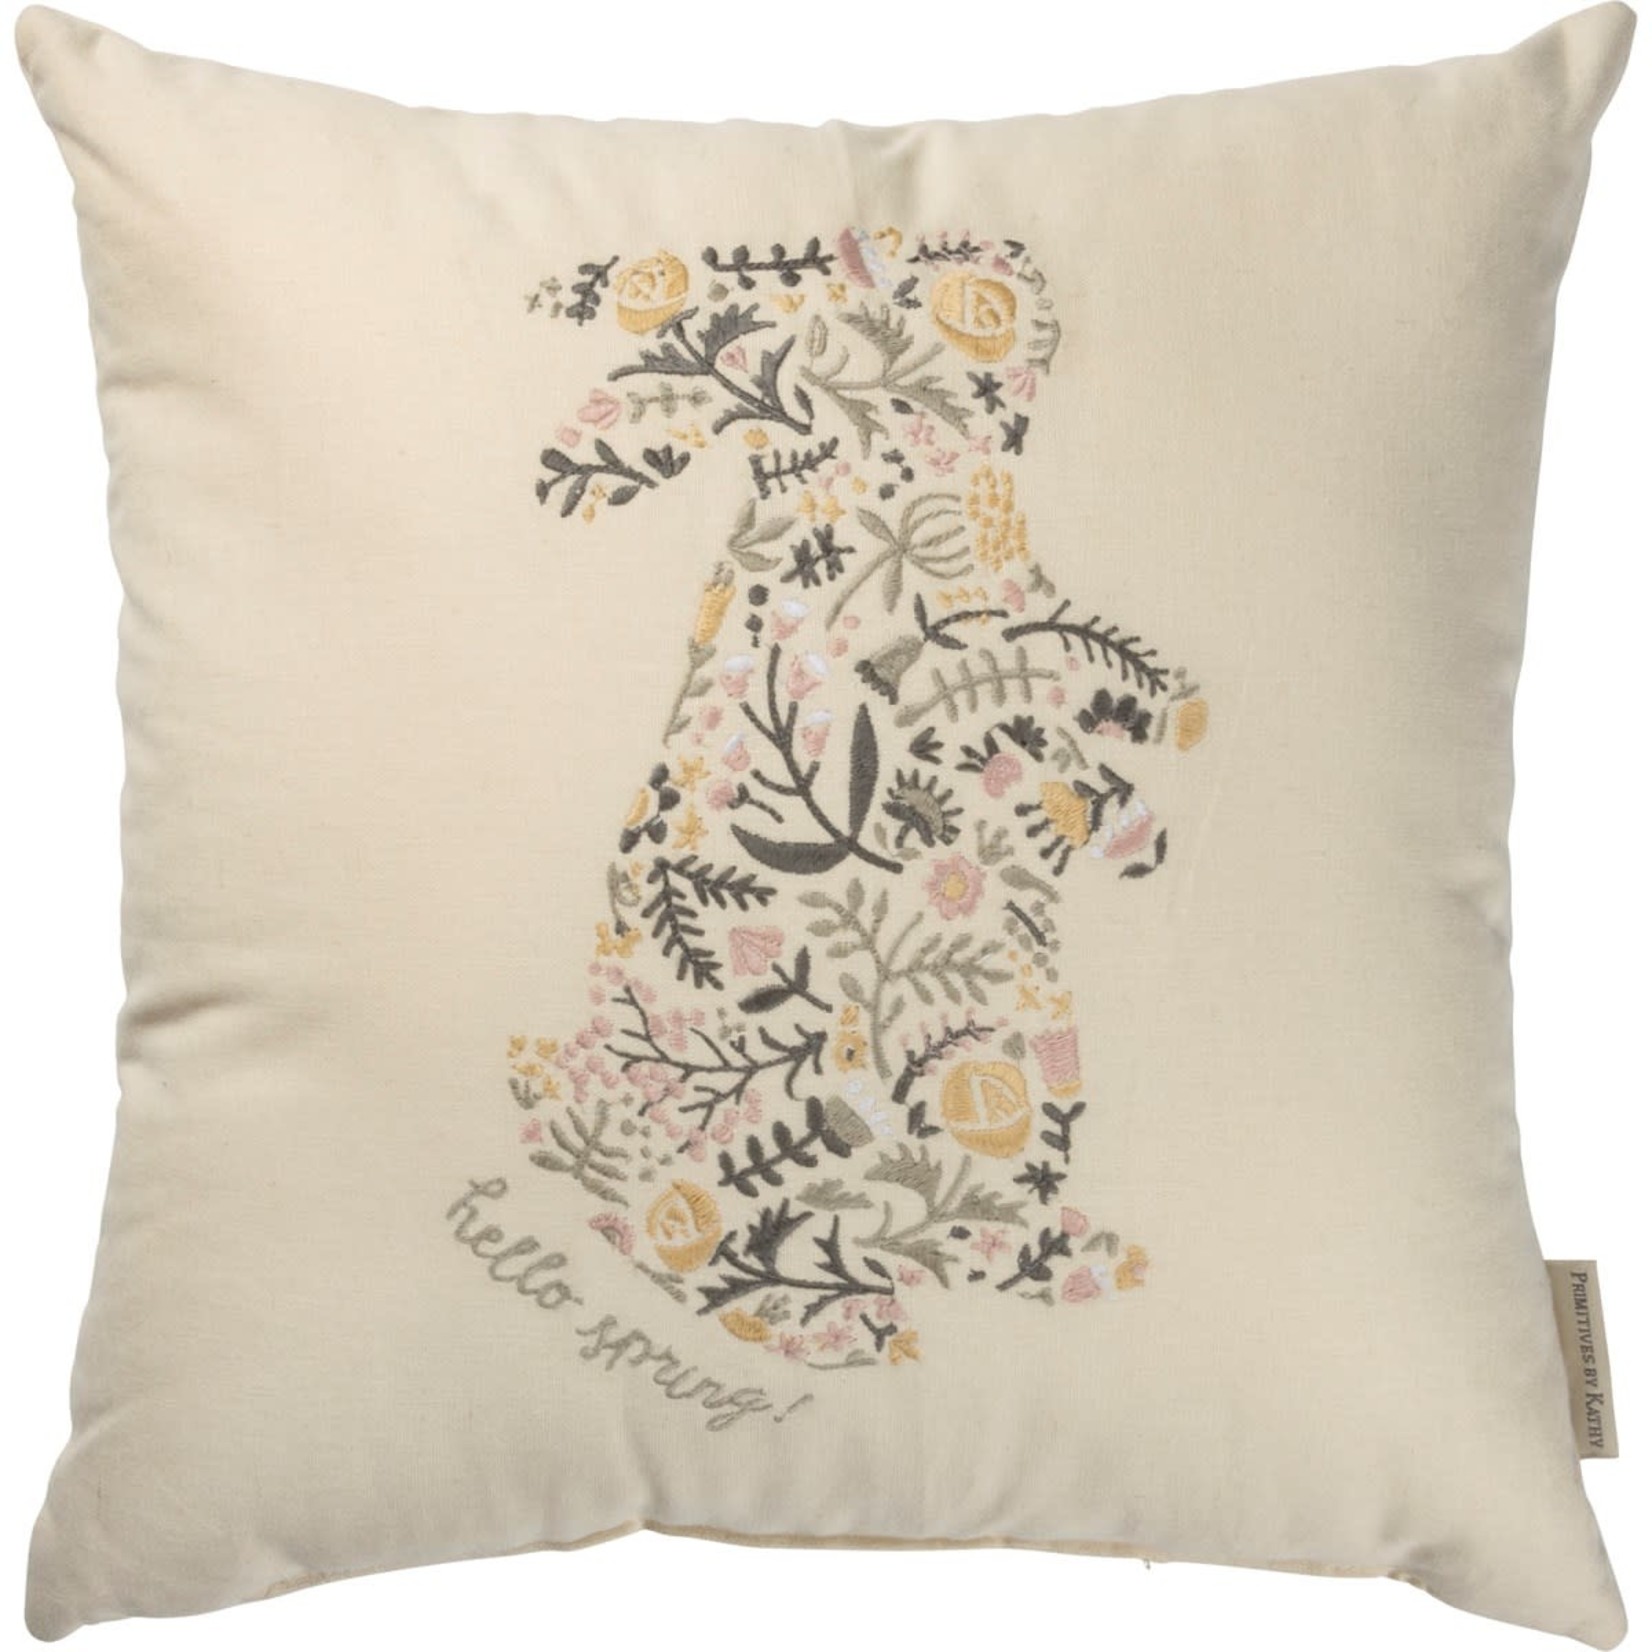 PRIMITIVES BY KATHY FLORAL BUNNY PILLOW